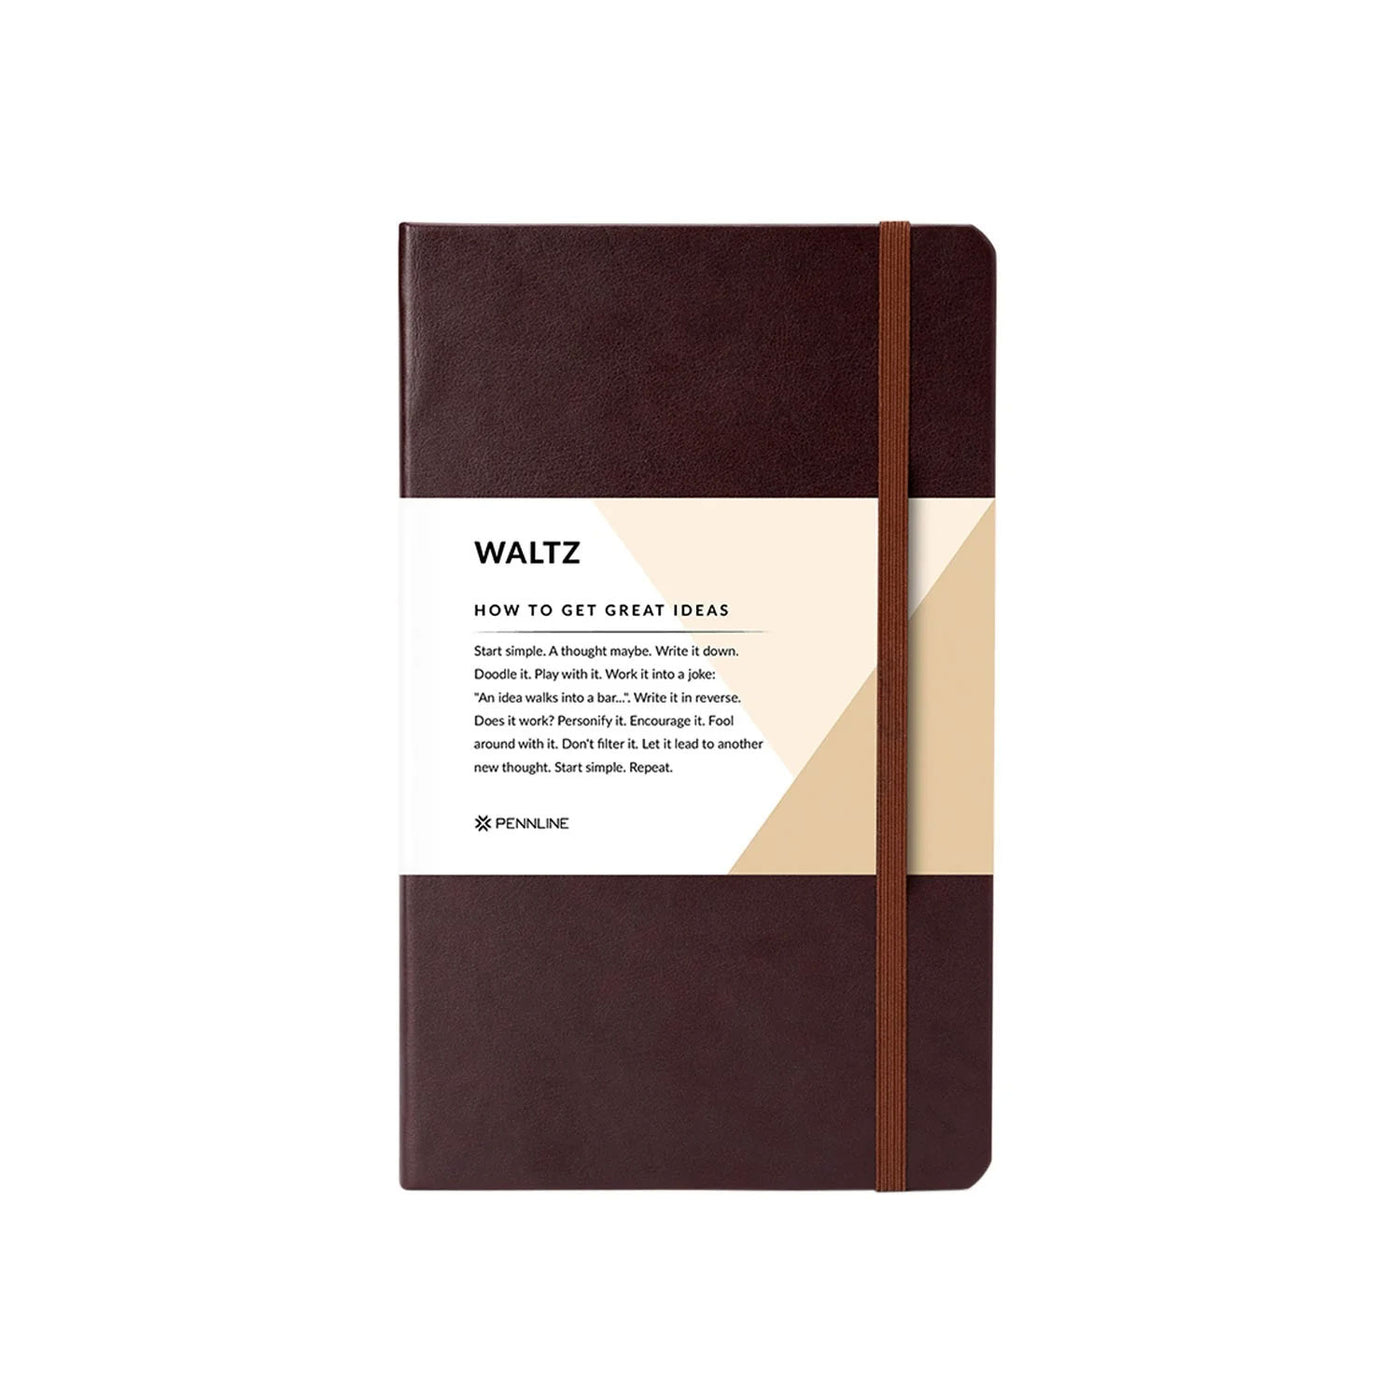 Pennline Waltz Hard Cover Notebook Brown - Ruled 1